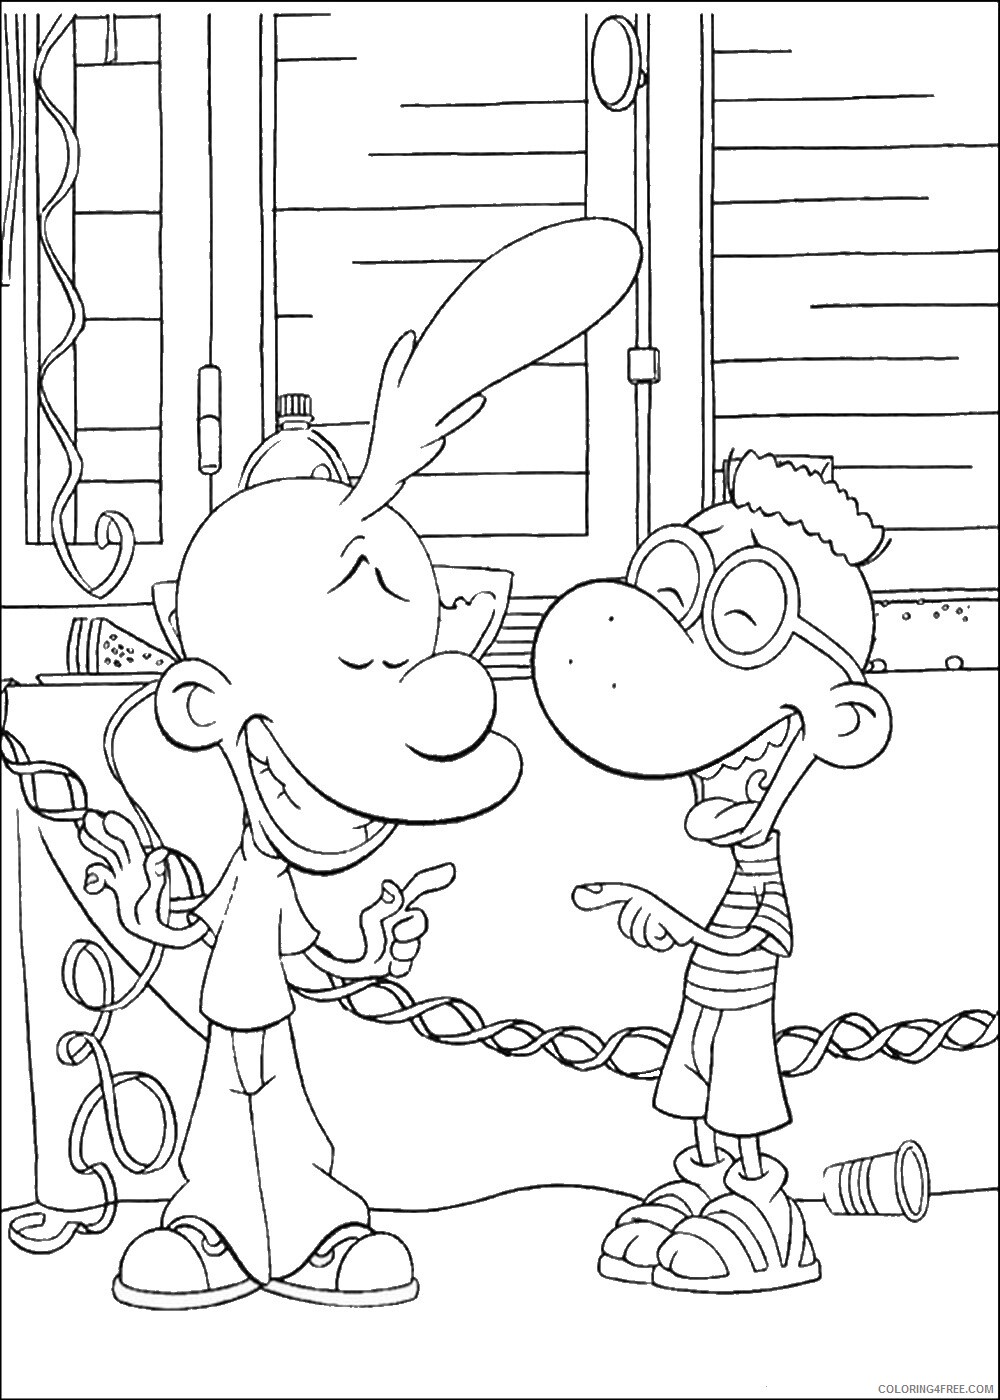 Titeuf Coloring Pages TV Film titeuf_cl_07 Printable 2020 10028 Coloring4free